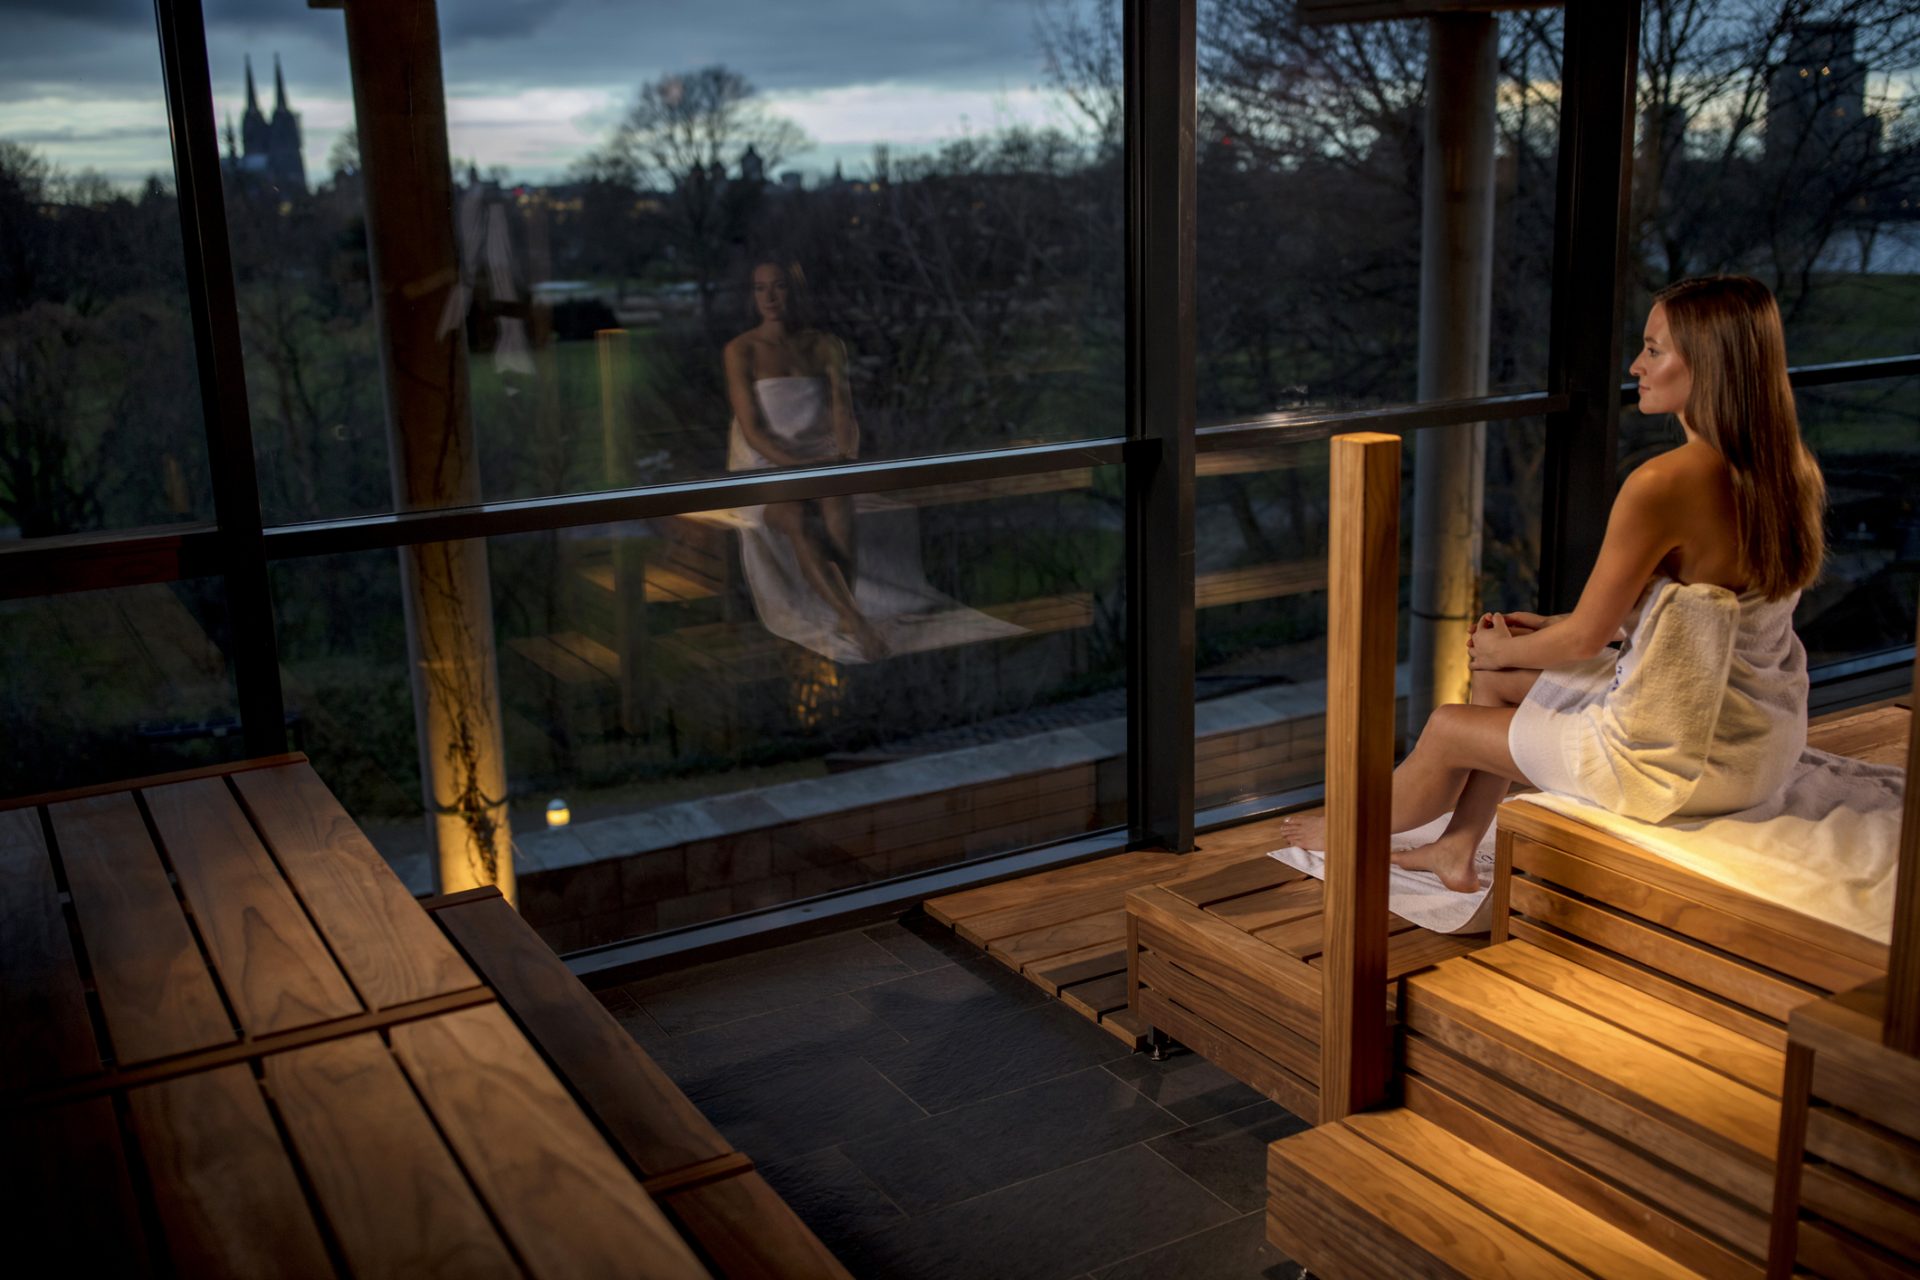 <p><span>In a groundbreaking doctoral dissertation, the University of Jyväskylä’s Earric Lee has shown that "Finnish sauna bathing" can have major health benefits according to a new release. </span></p>